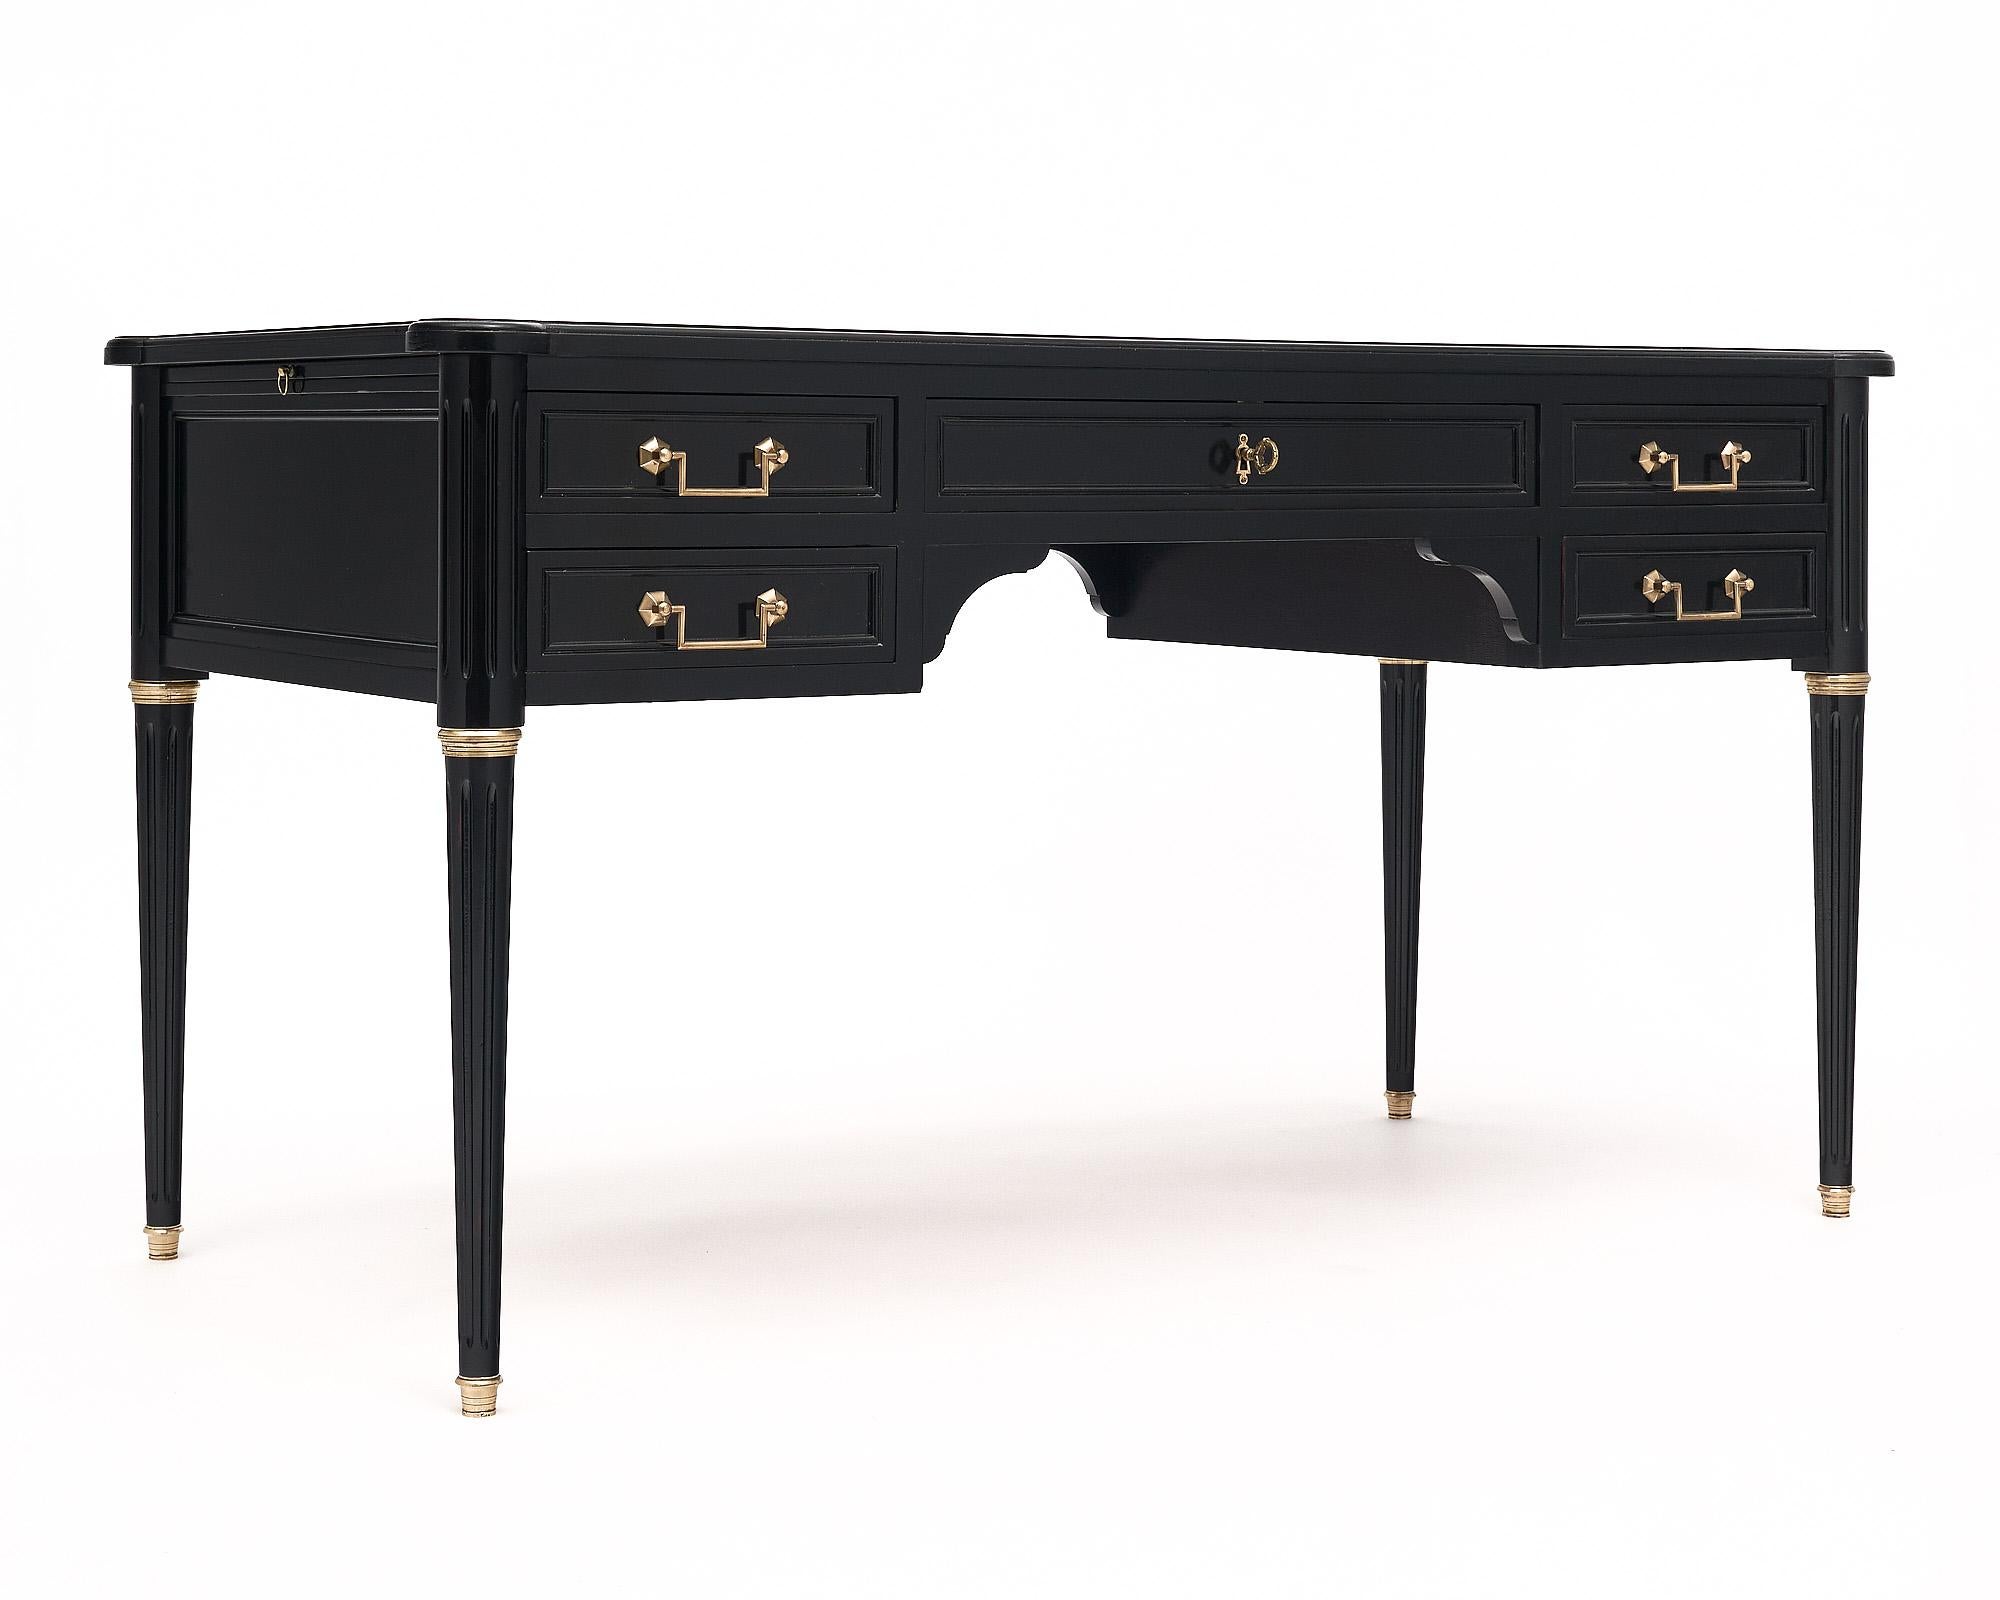 Writing desk from France in the Louis XVI style. This piece has been ebonized and finished with a lustrous French polish. There are five dovetailed drawers all with brass original hardware. The center drawer has a key and lock in working condition.